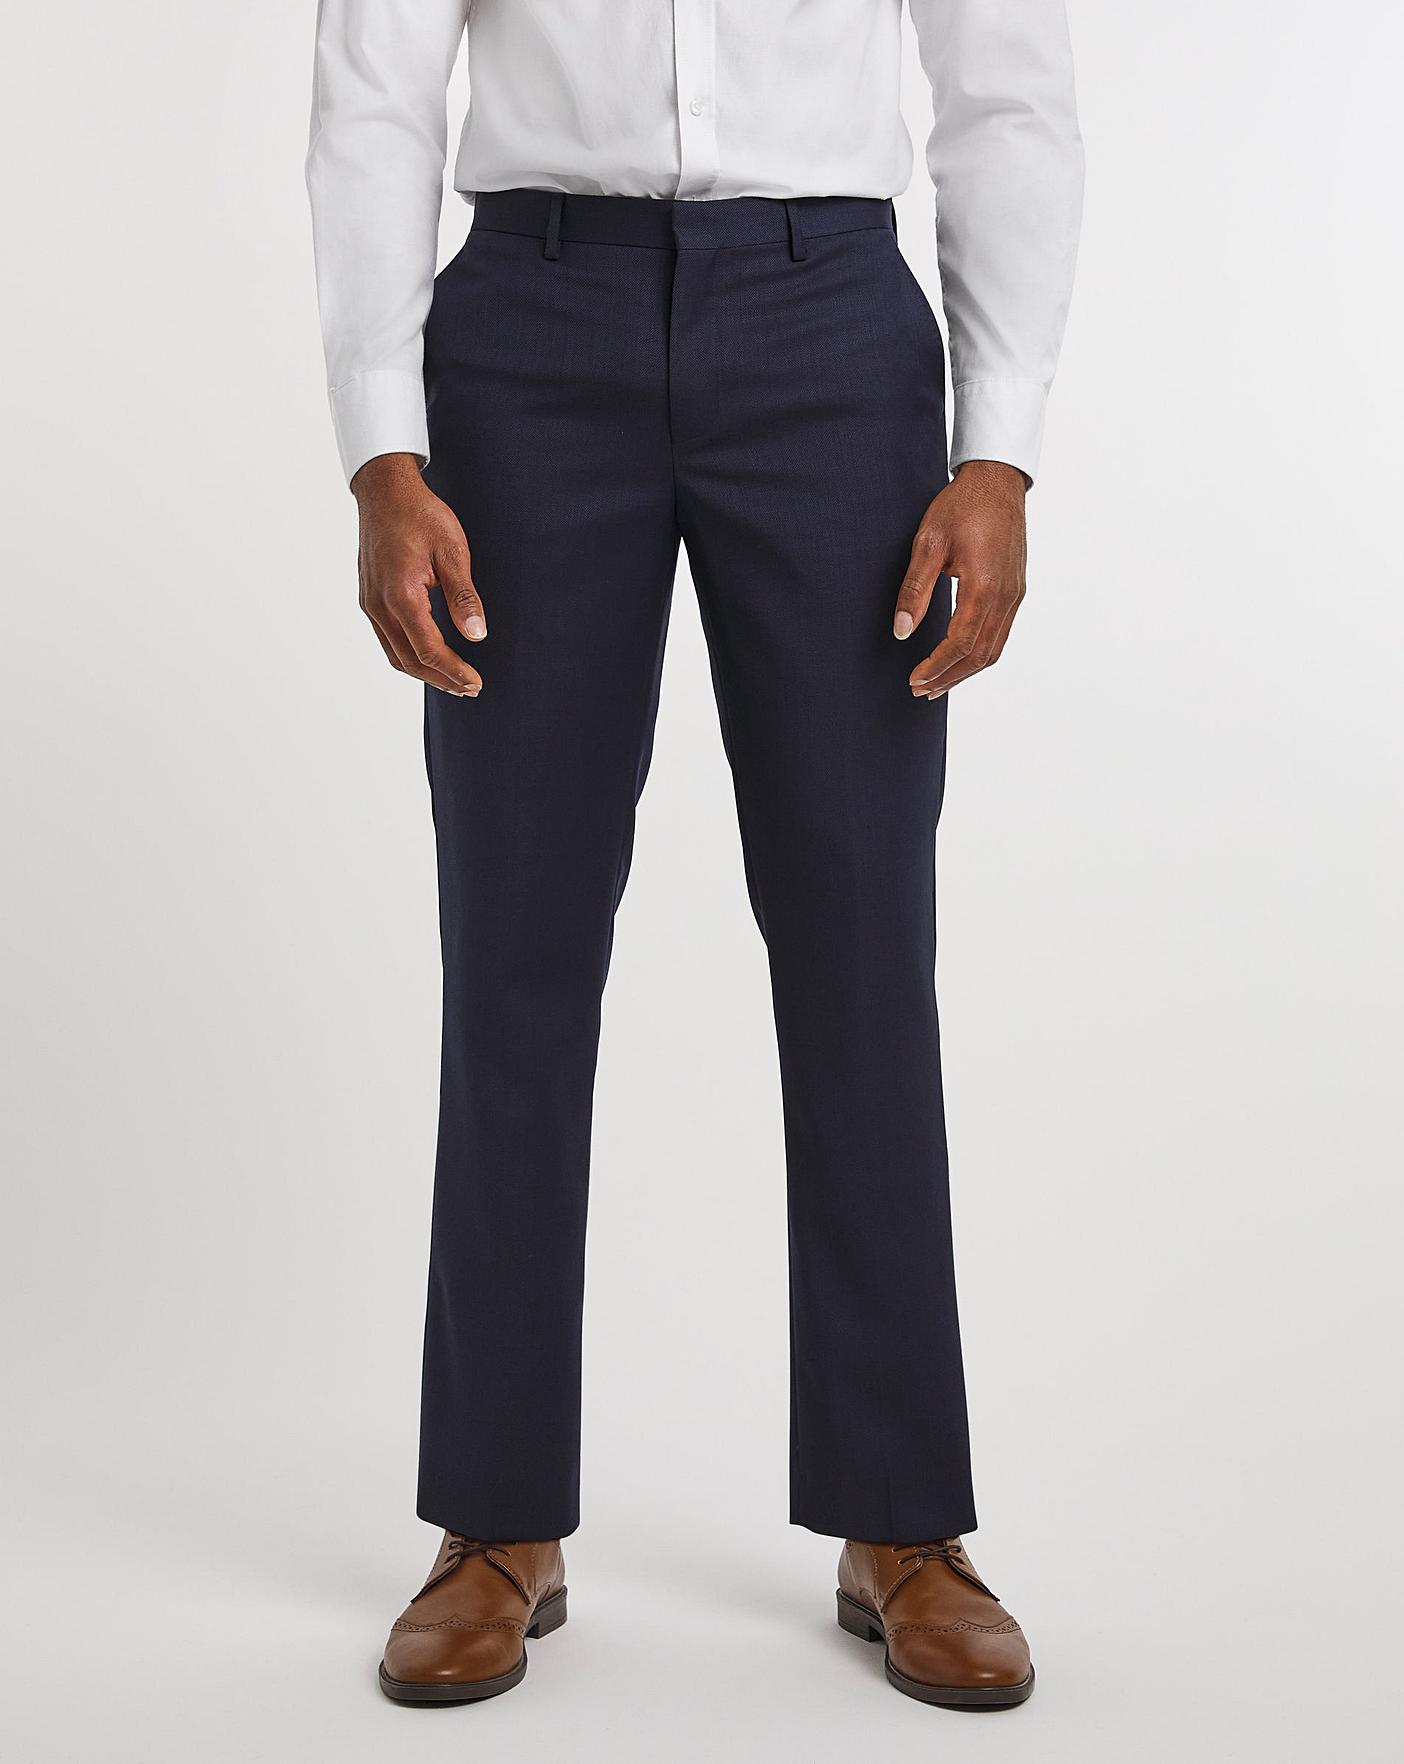 River Island textured slim suit trousers in grey check | ASOS